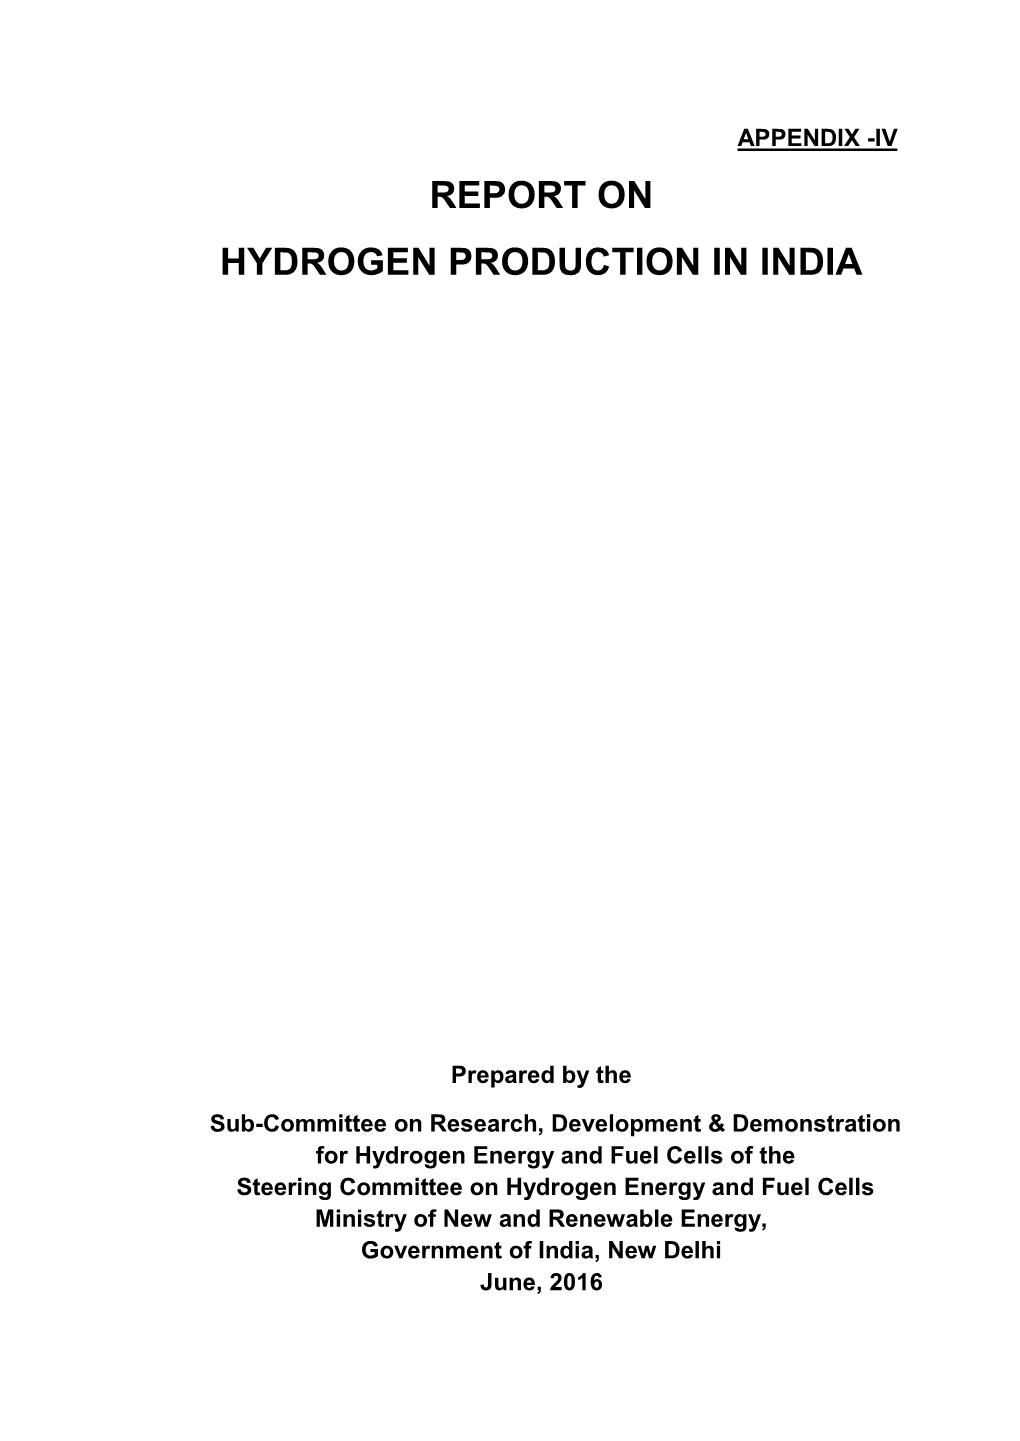 Report on Hydrogen Production in India